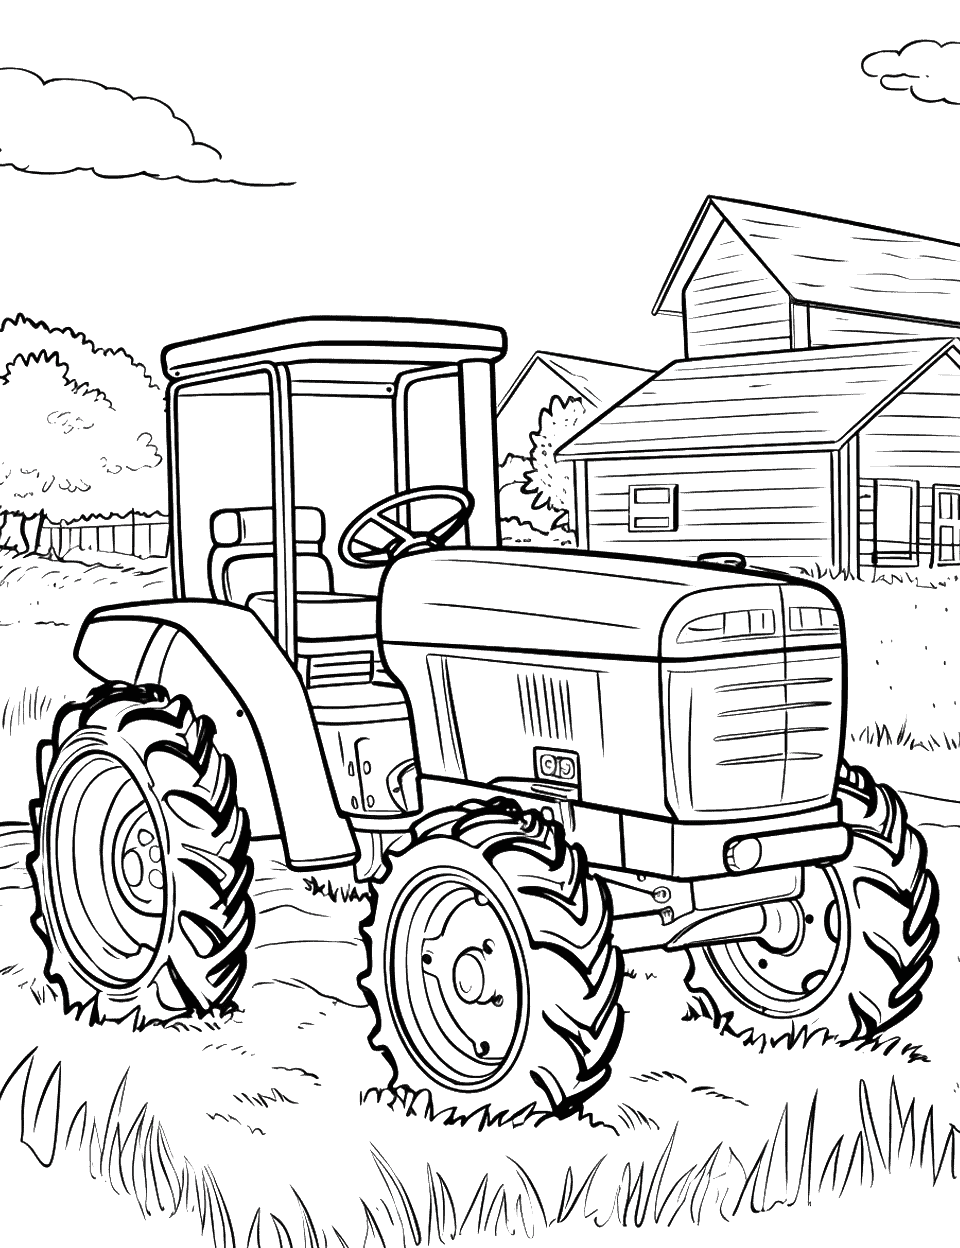 Tractor by the Farm Coloring Page - A tractor parked near a farmhouse.